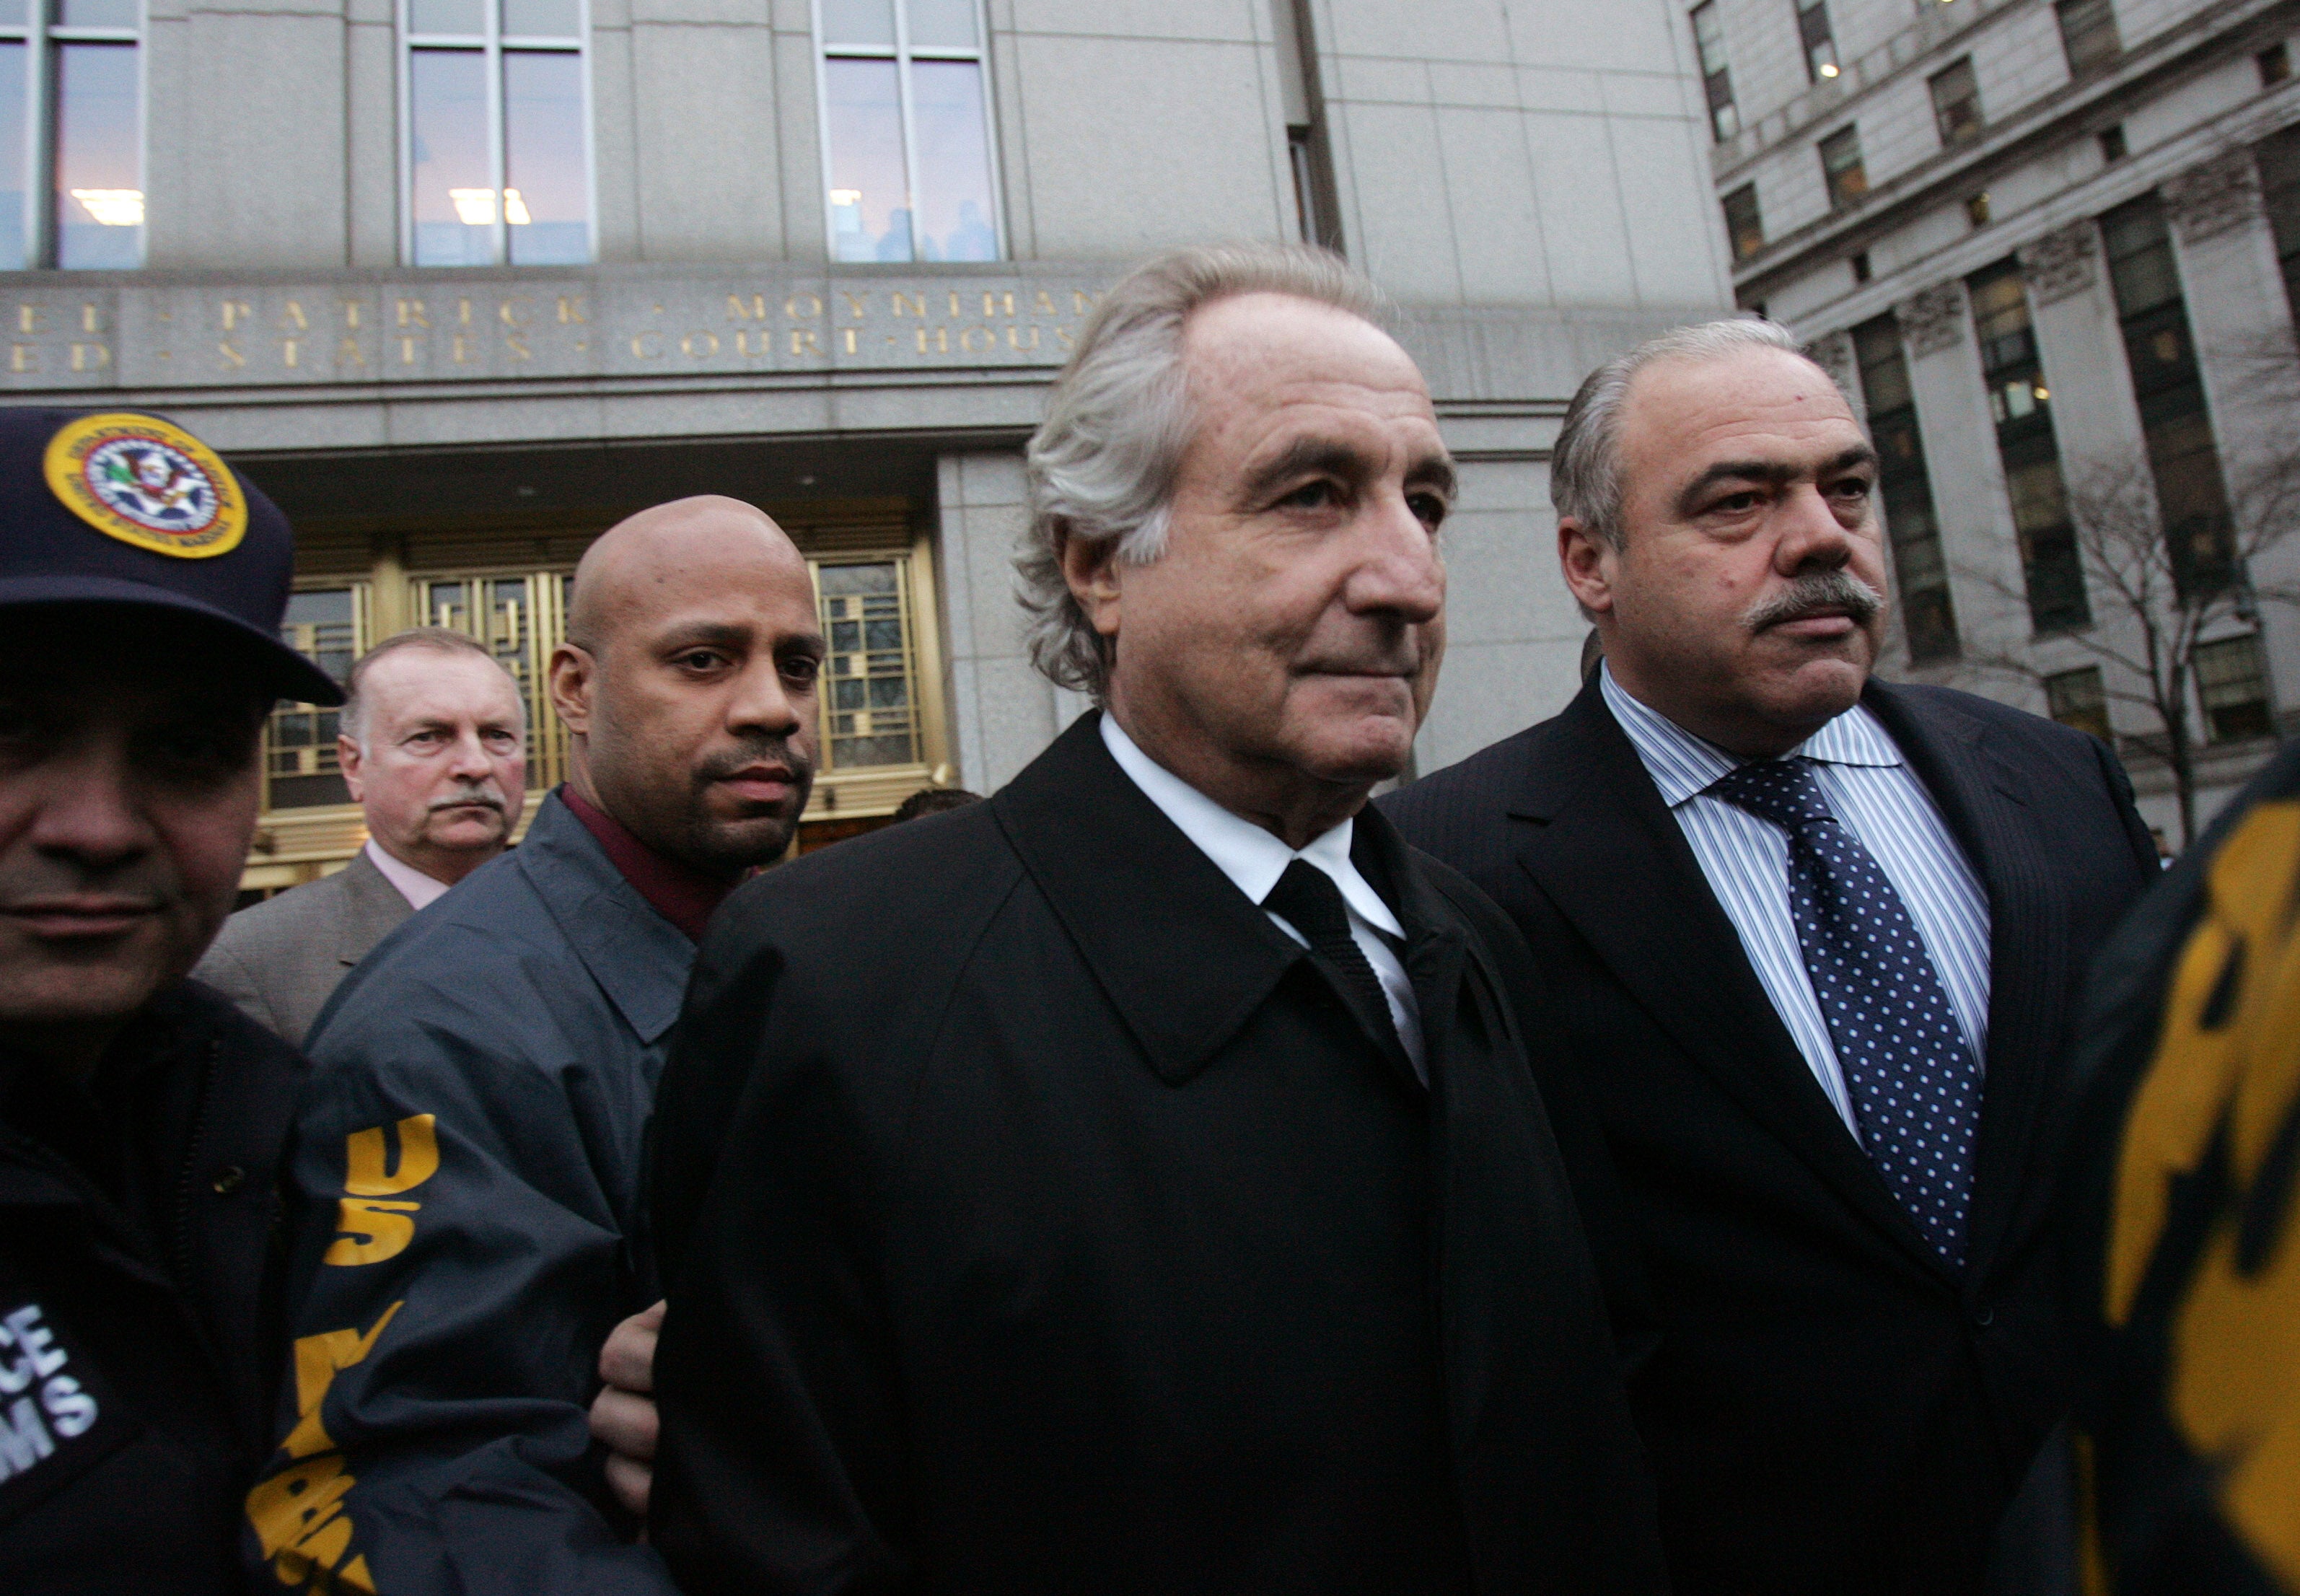 Madoff at Federal Court after a bail hearing in New York City on 5 January 2009